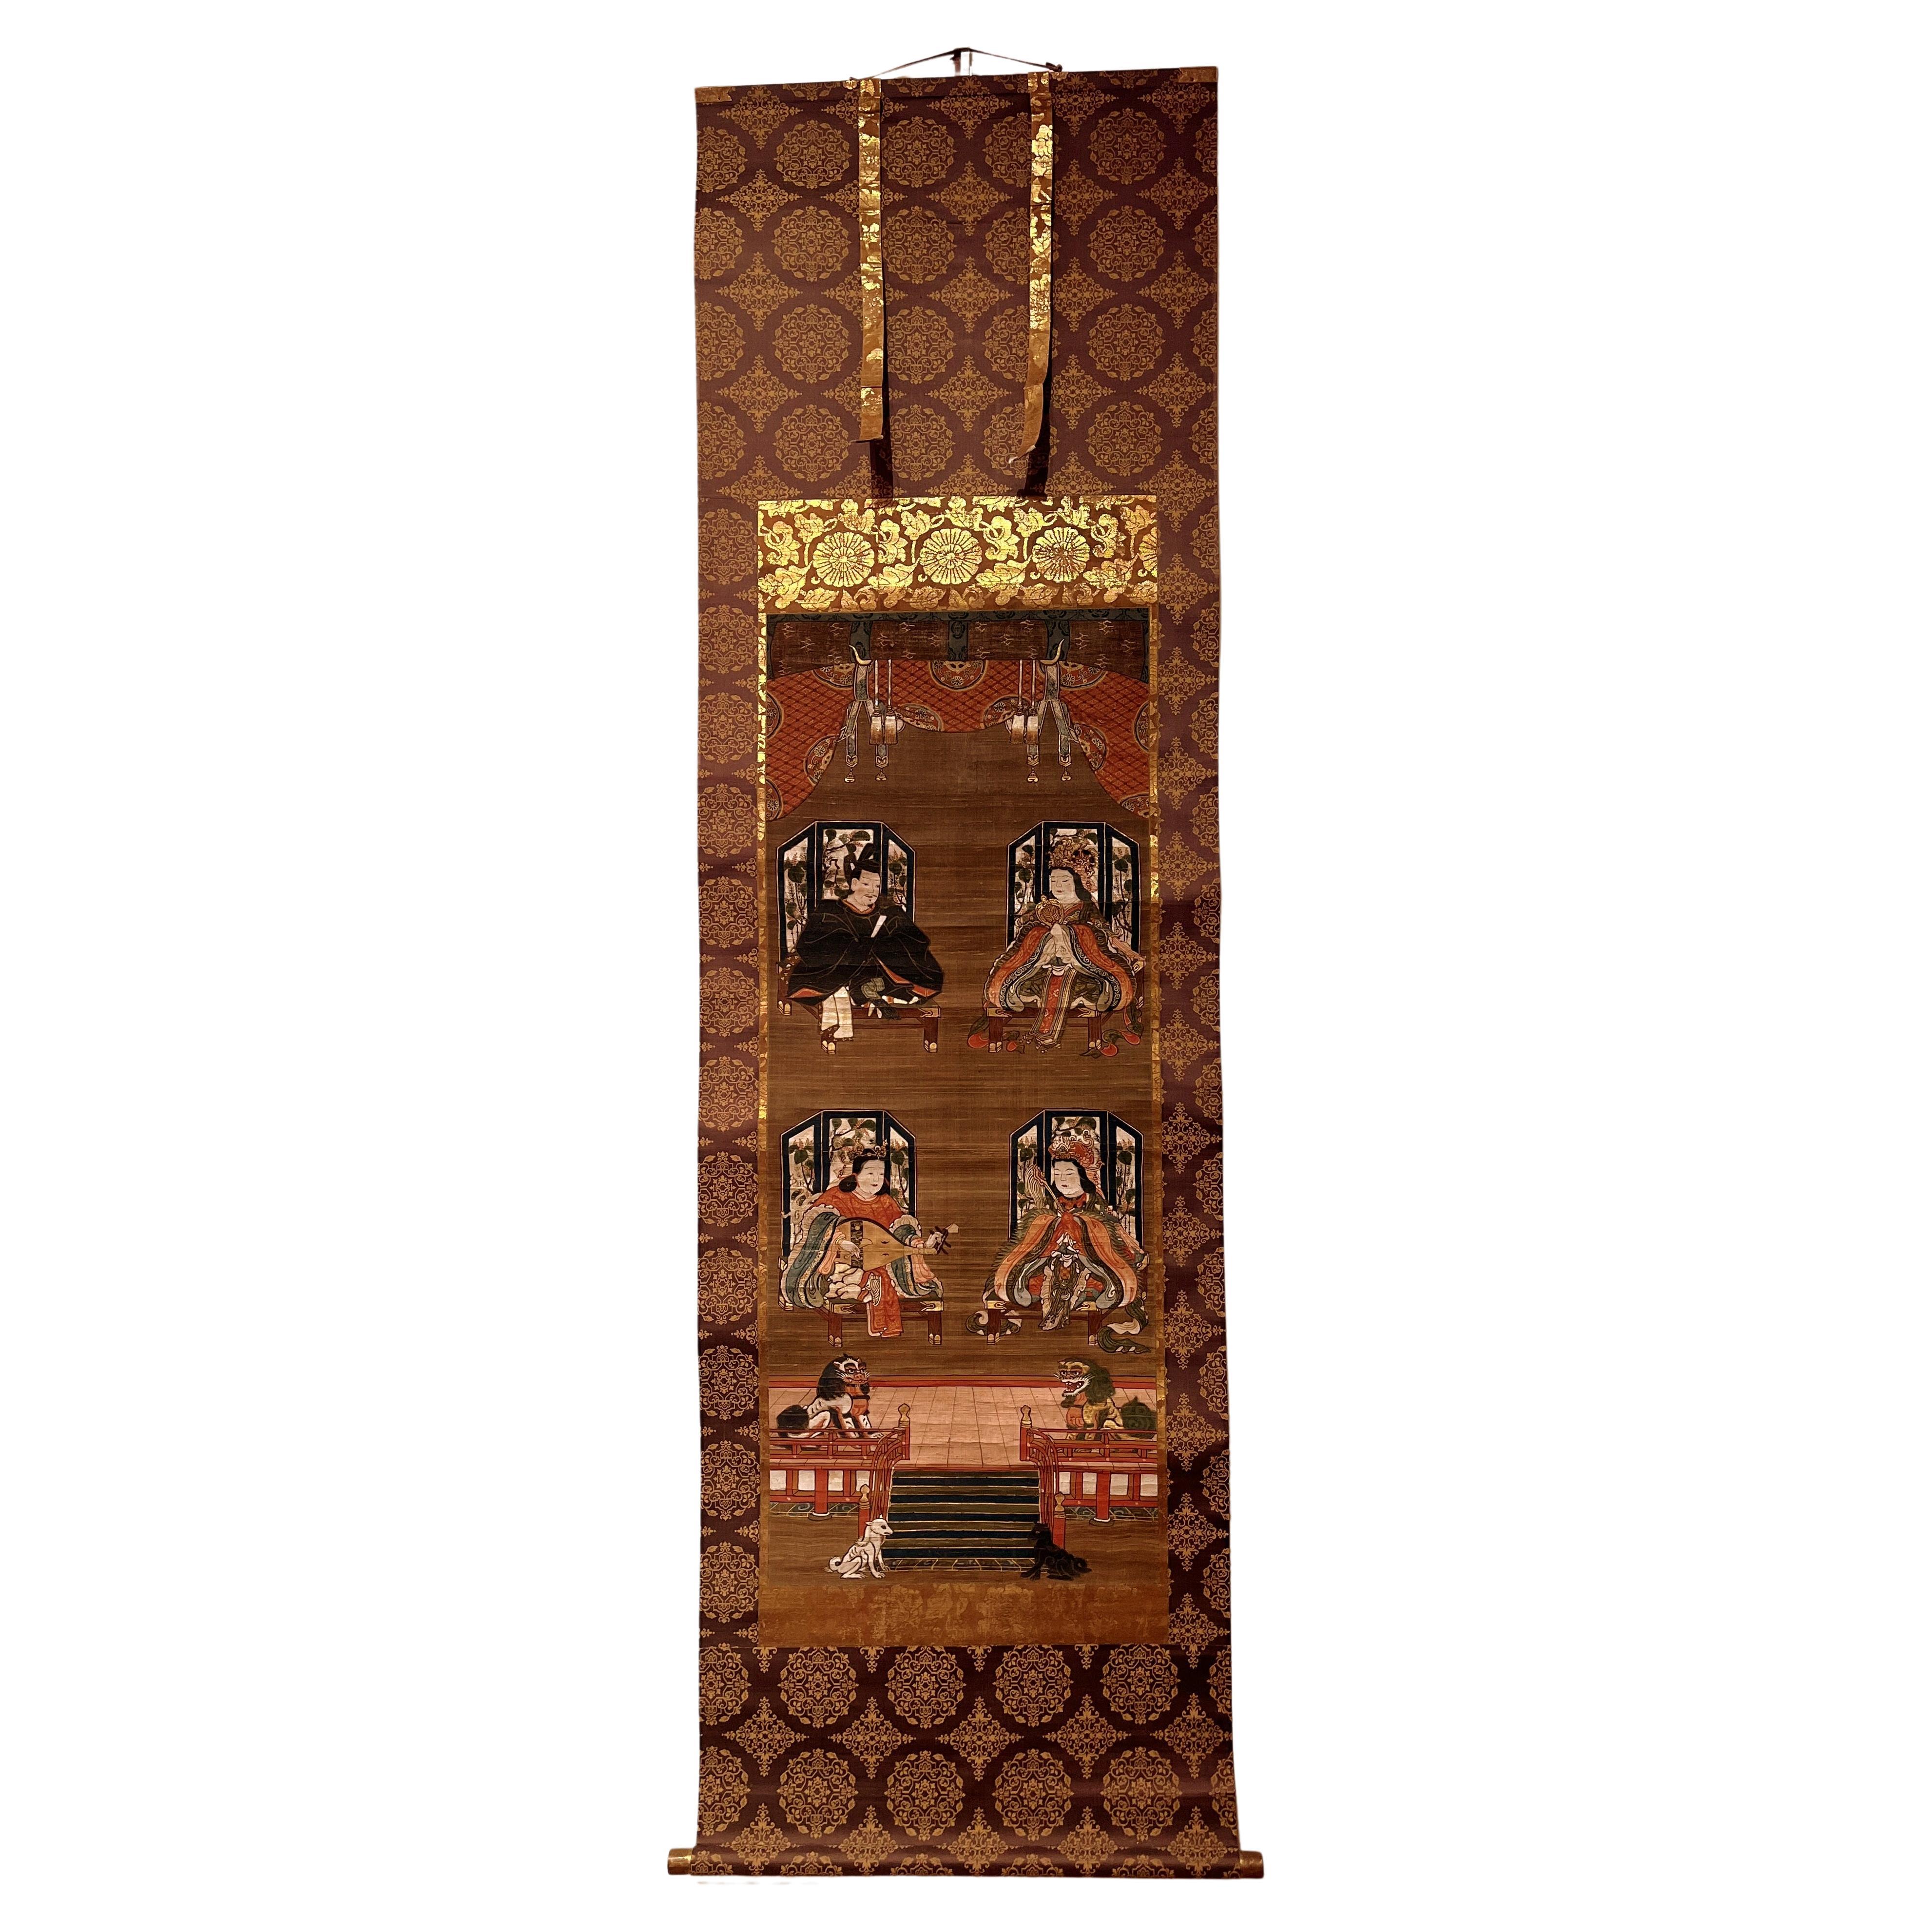 Japanese Shito Religion of Four Deities, Scroll Painting